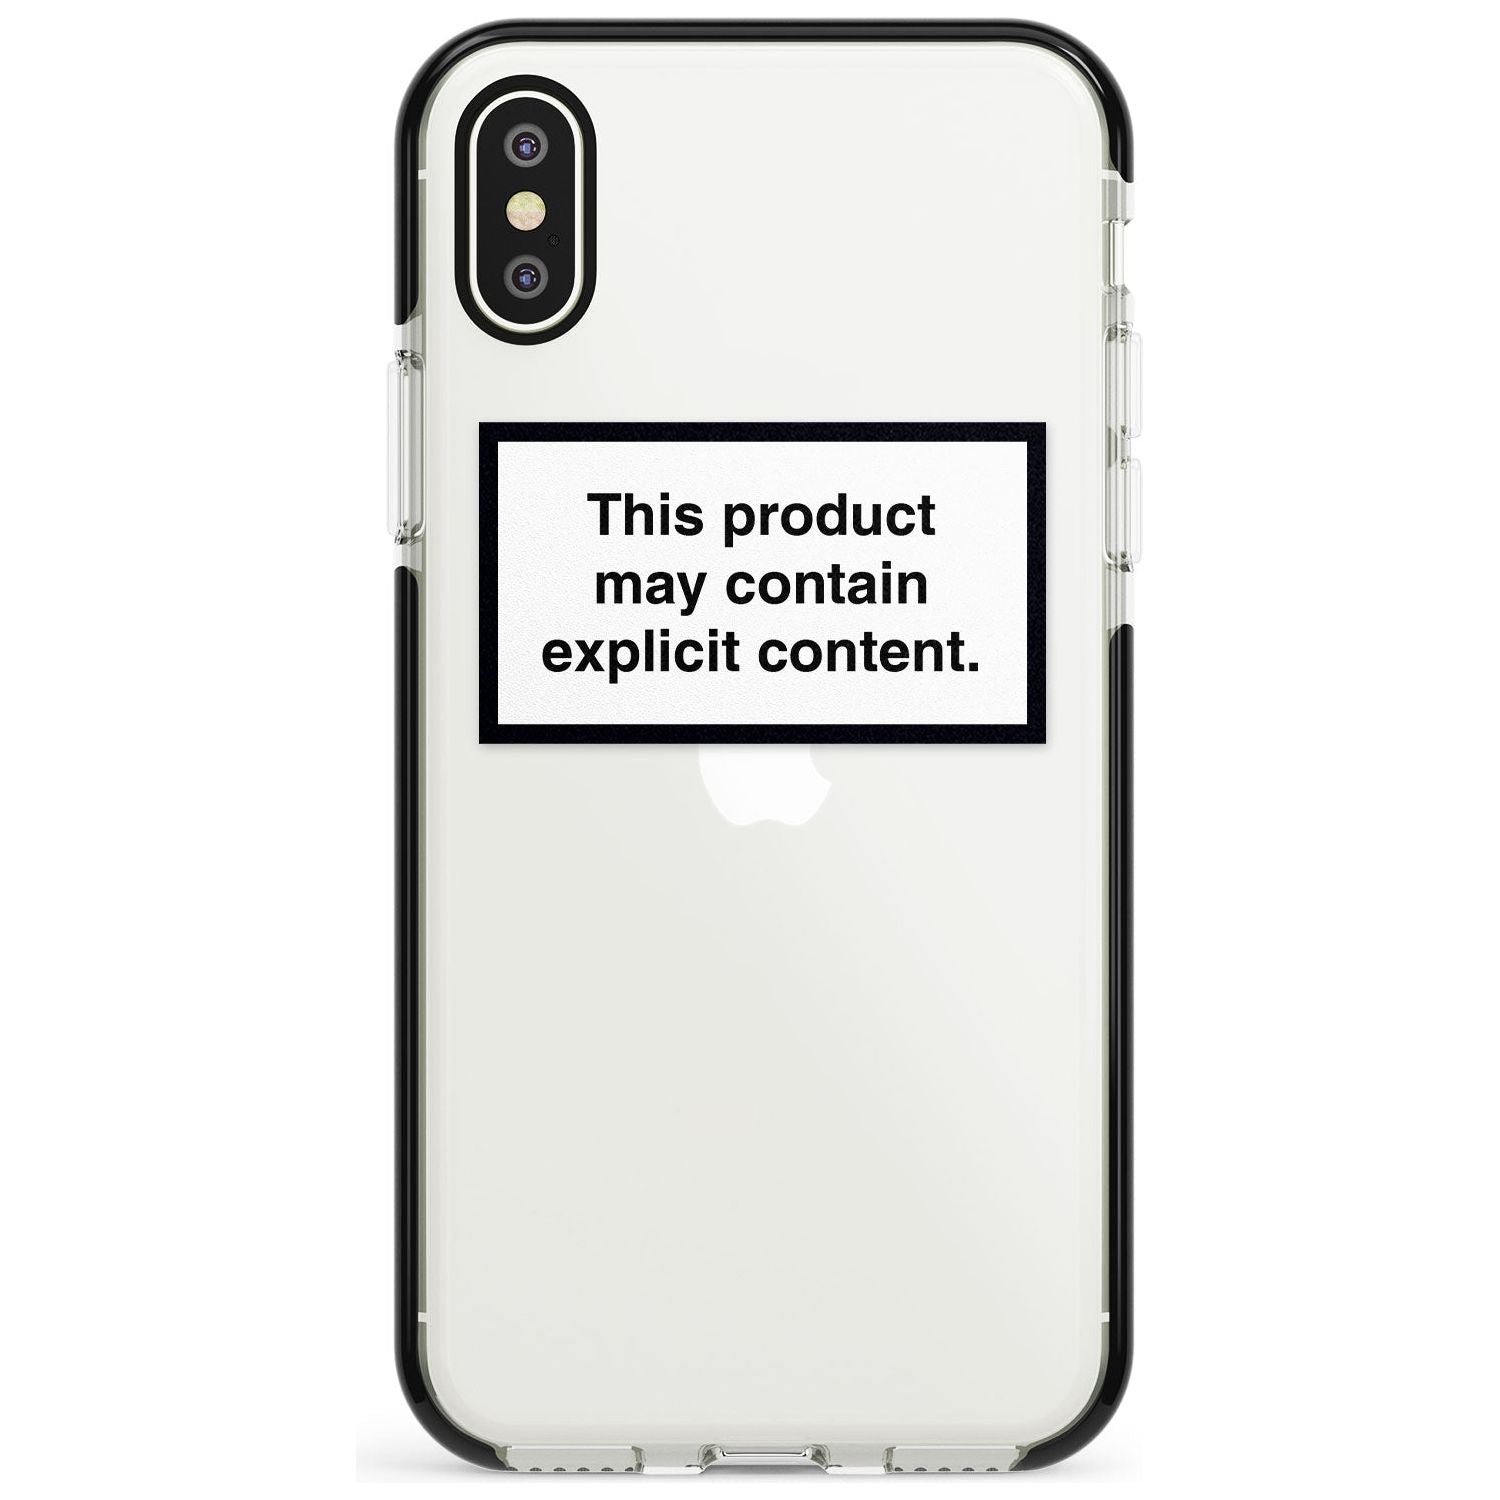 This product may contain explicit content Pink Fade Impact Phone Case for iPhone X XS Max XR